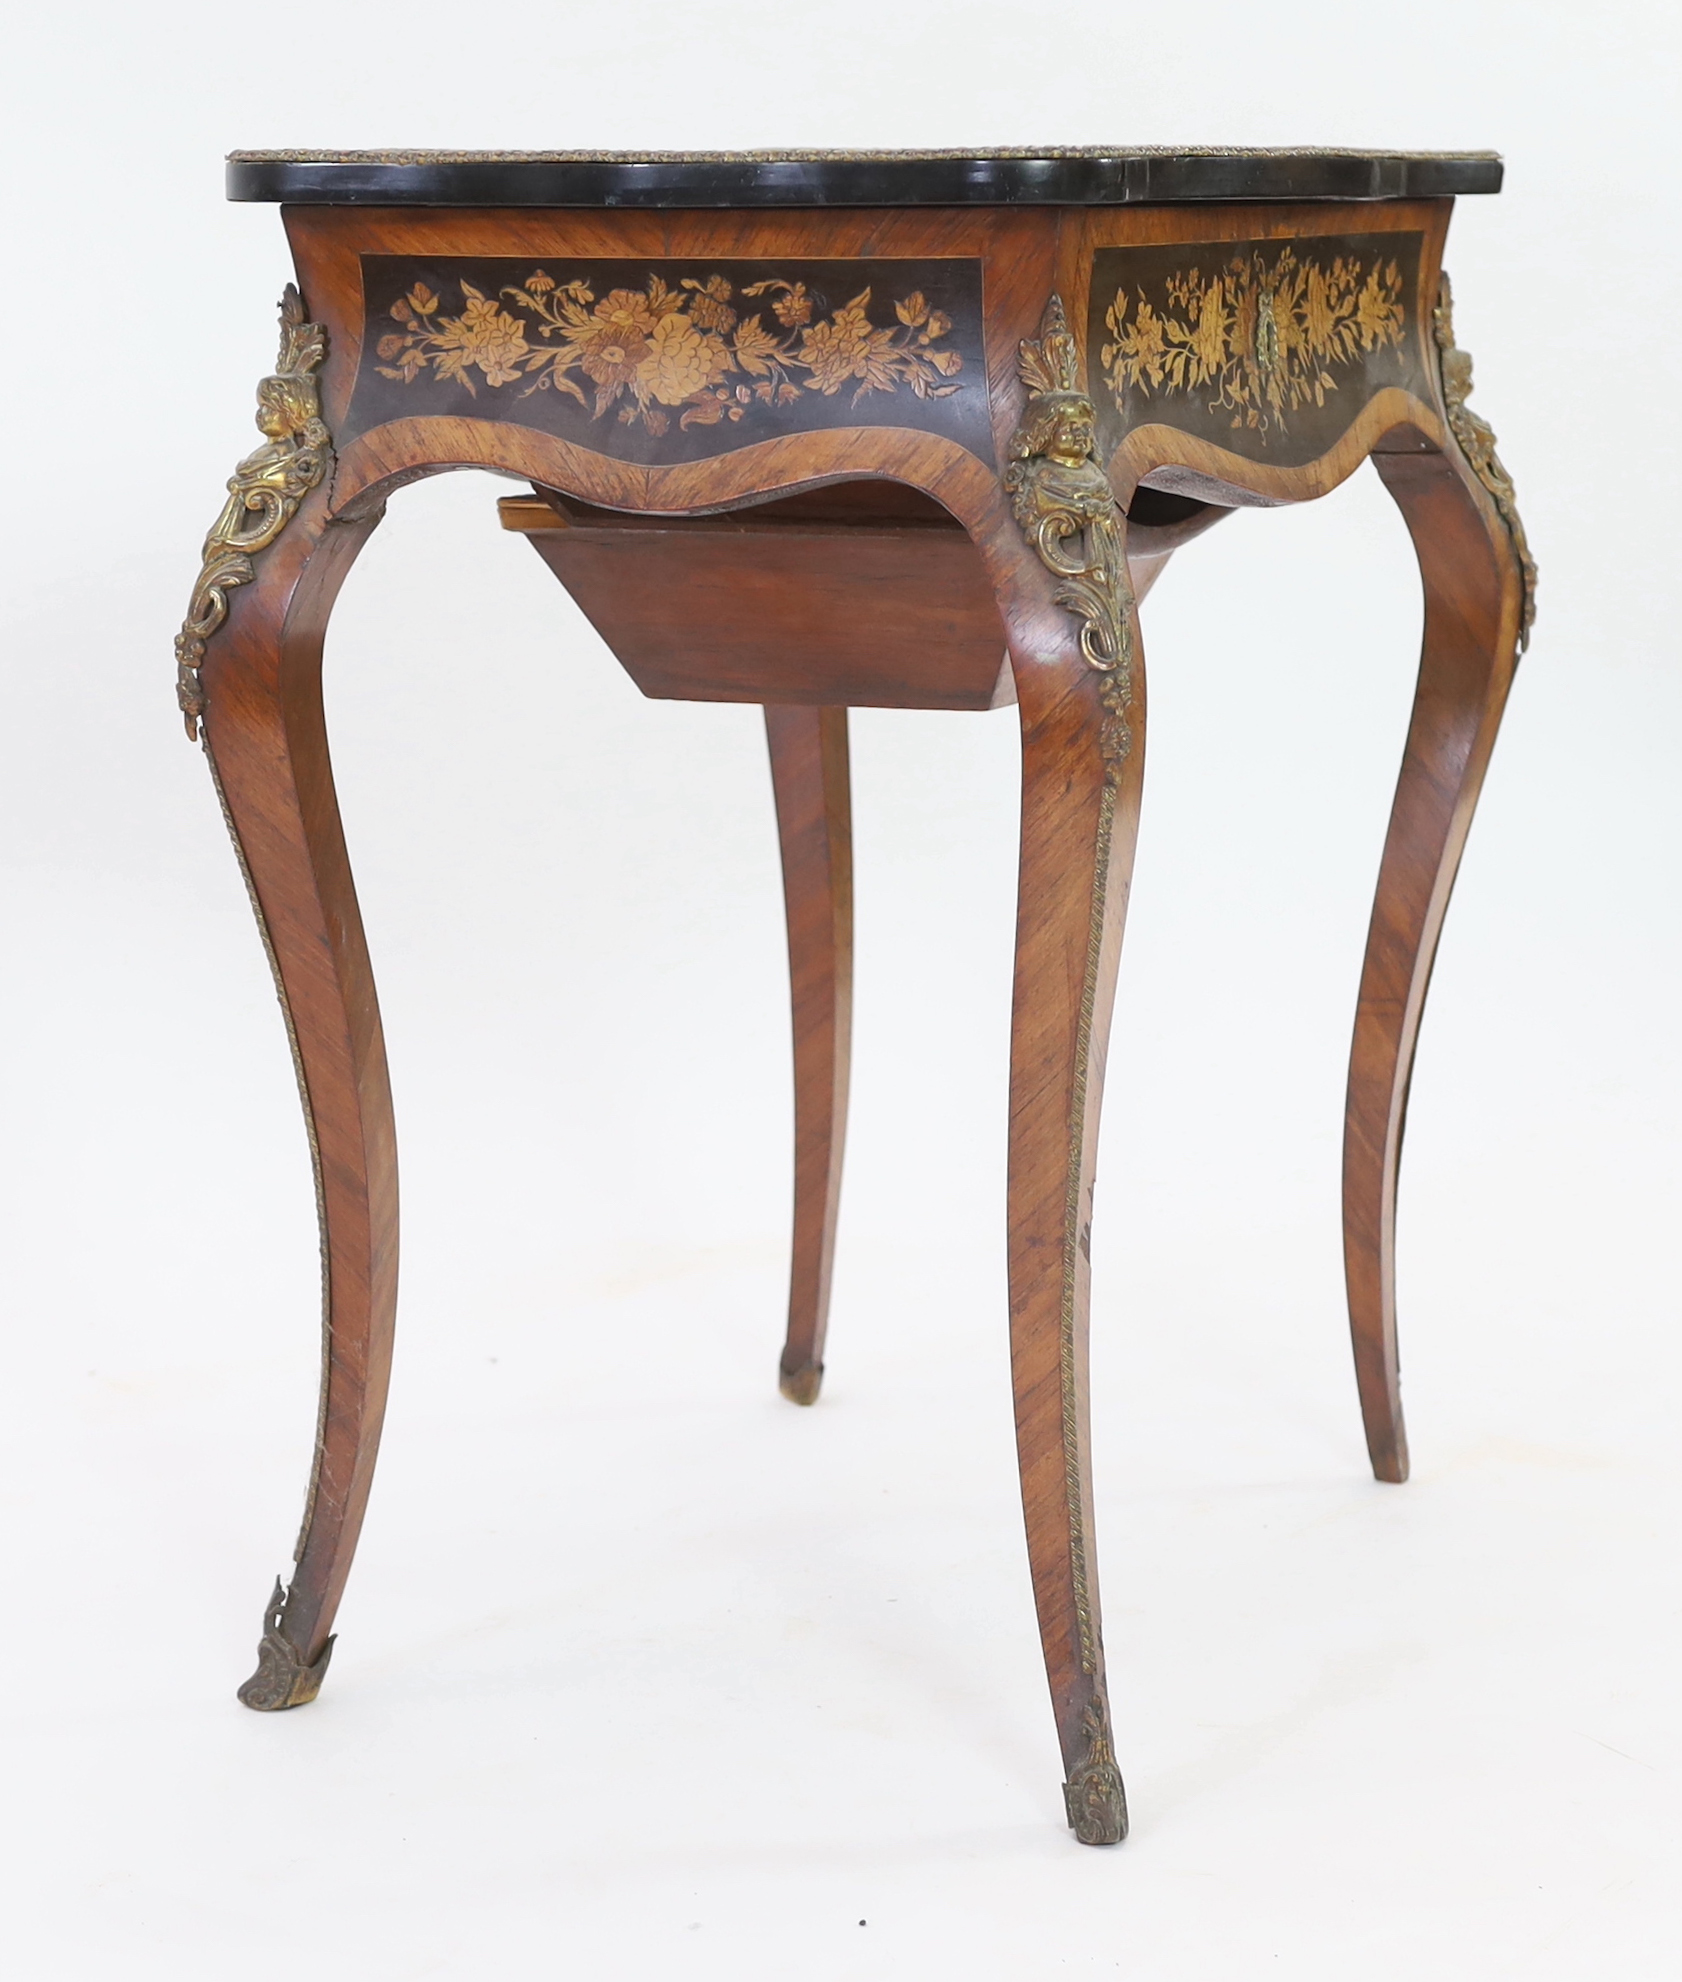 A 19th century French rosewood and marquetry poudreuse, width 63cm, depth 43cm, height 73cm